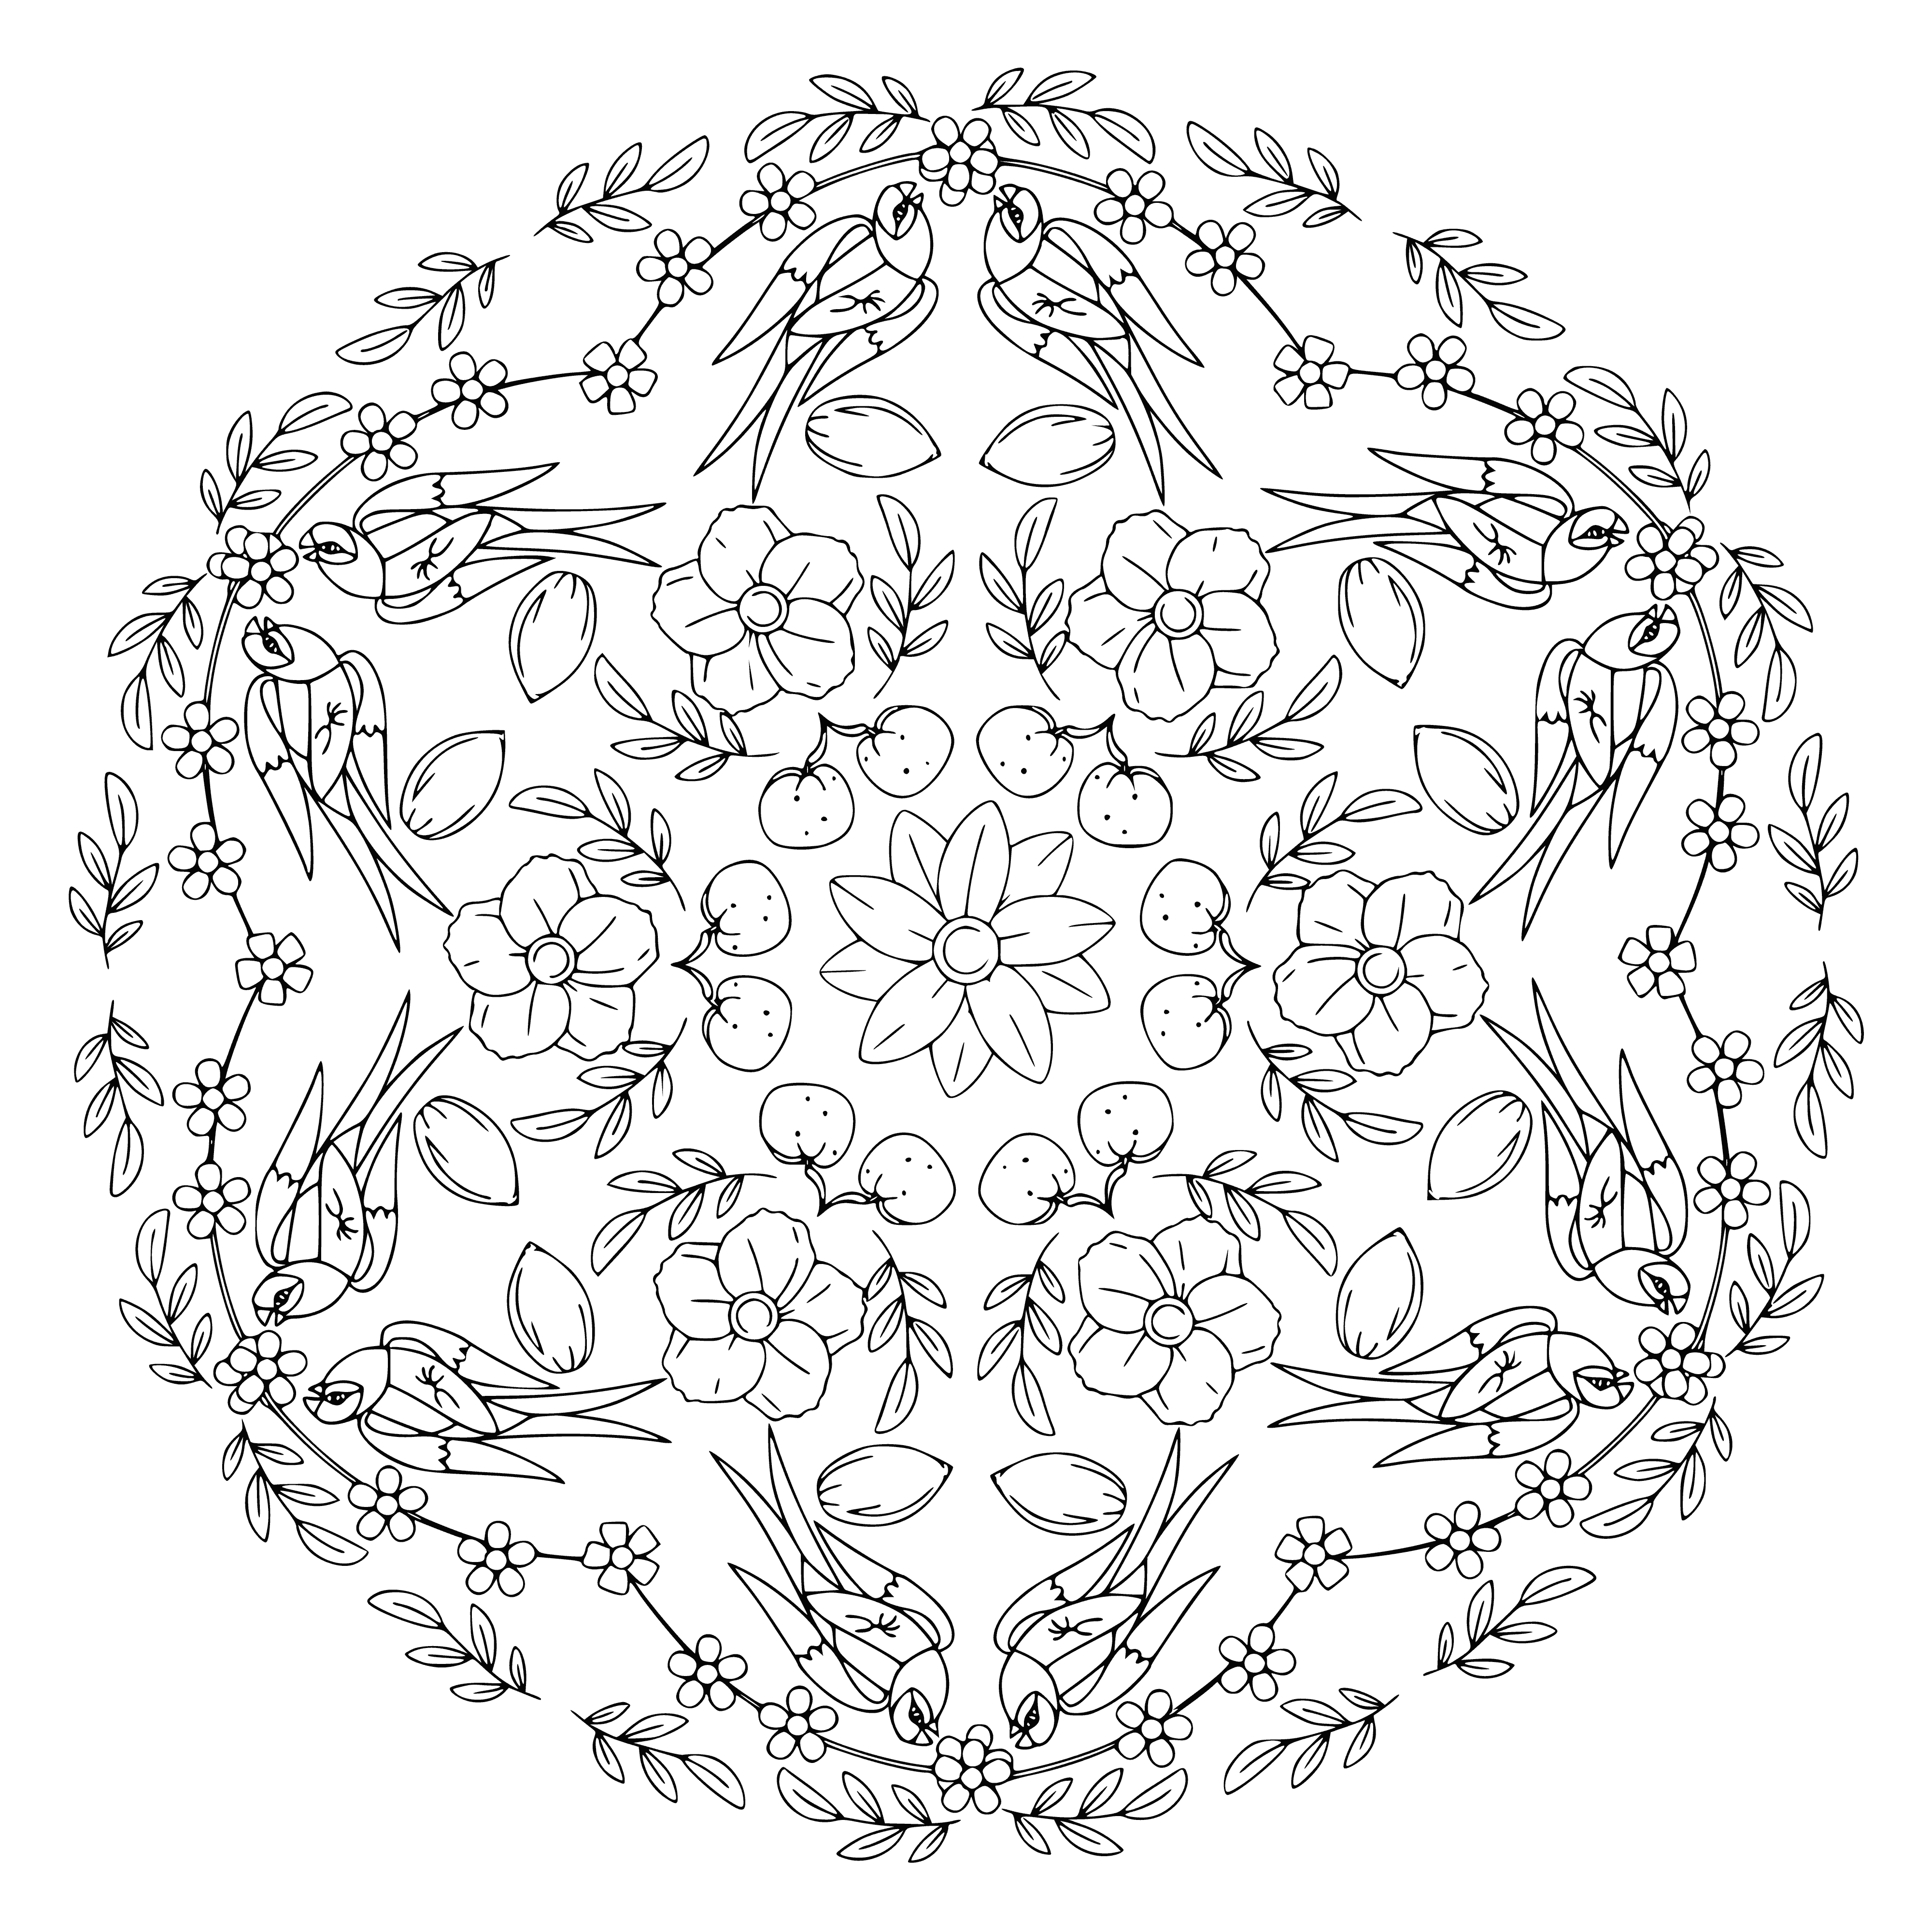 coloring page: Coloring page has intricate mandala w/ swallows flying around it.